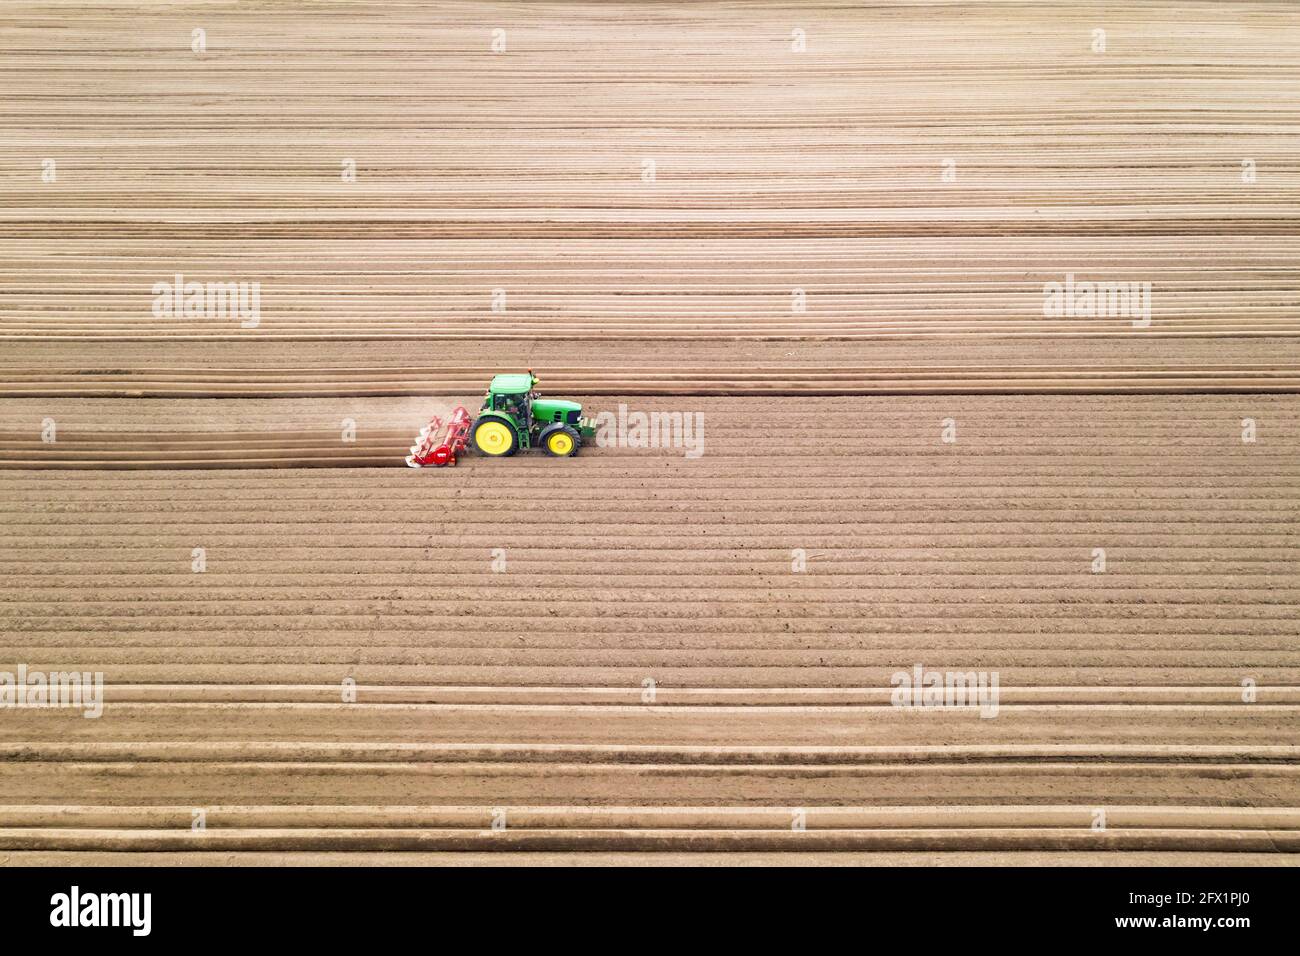 Lonely tractor on agricultural field with rows of plowed soil. Agricultural fields prepared for planting crops, topdown view. Industrial agriculture concept. Drone photography Stock Photo